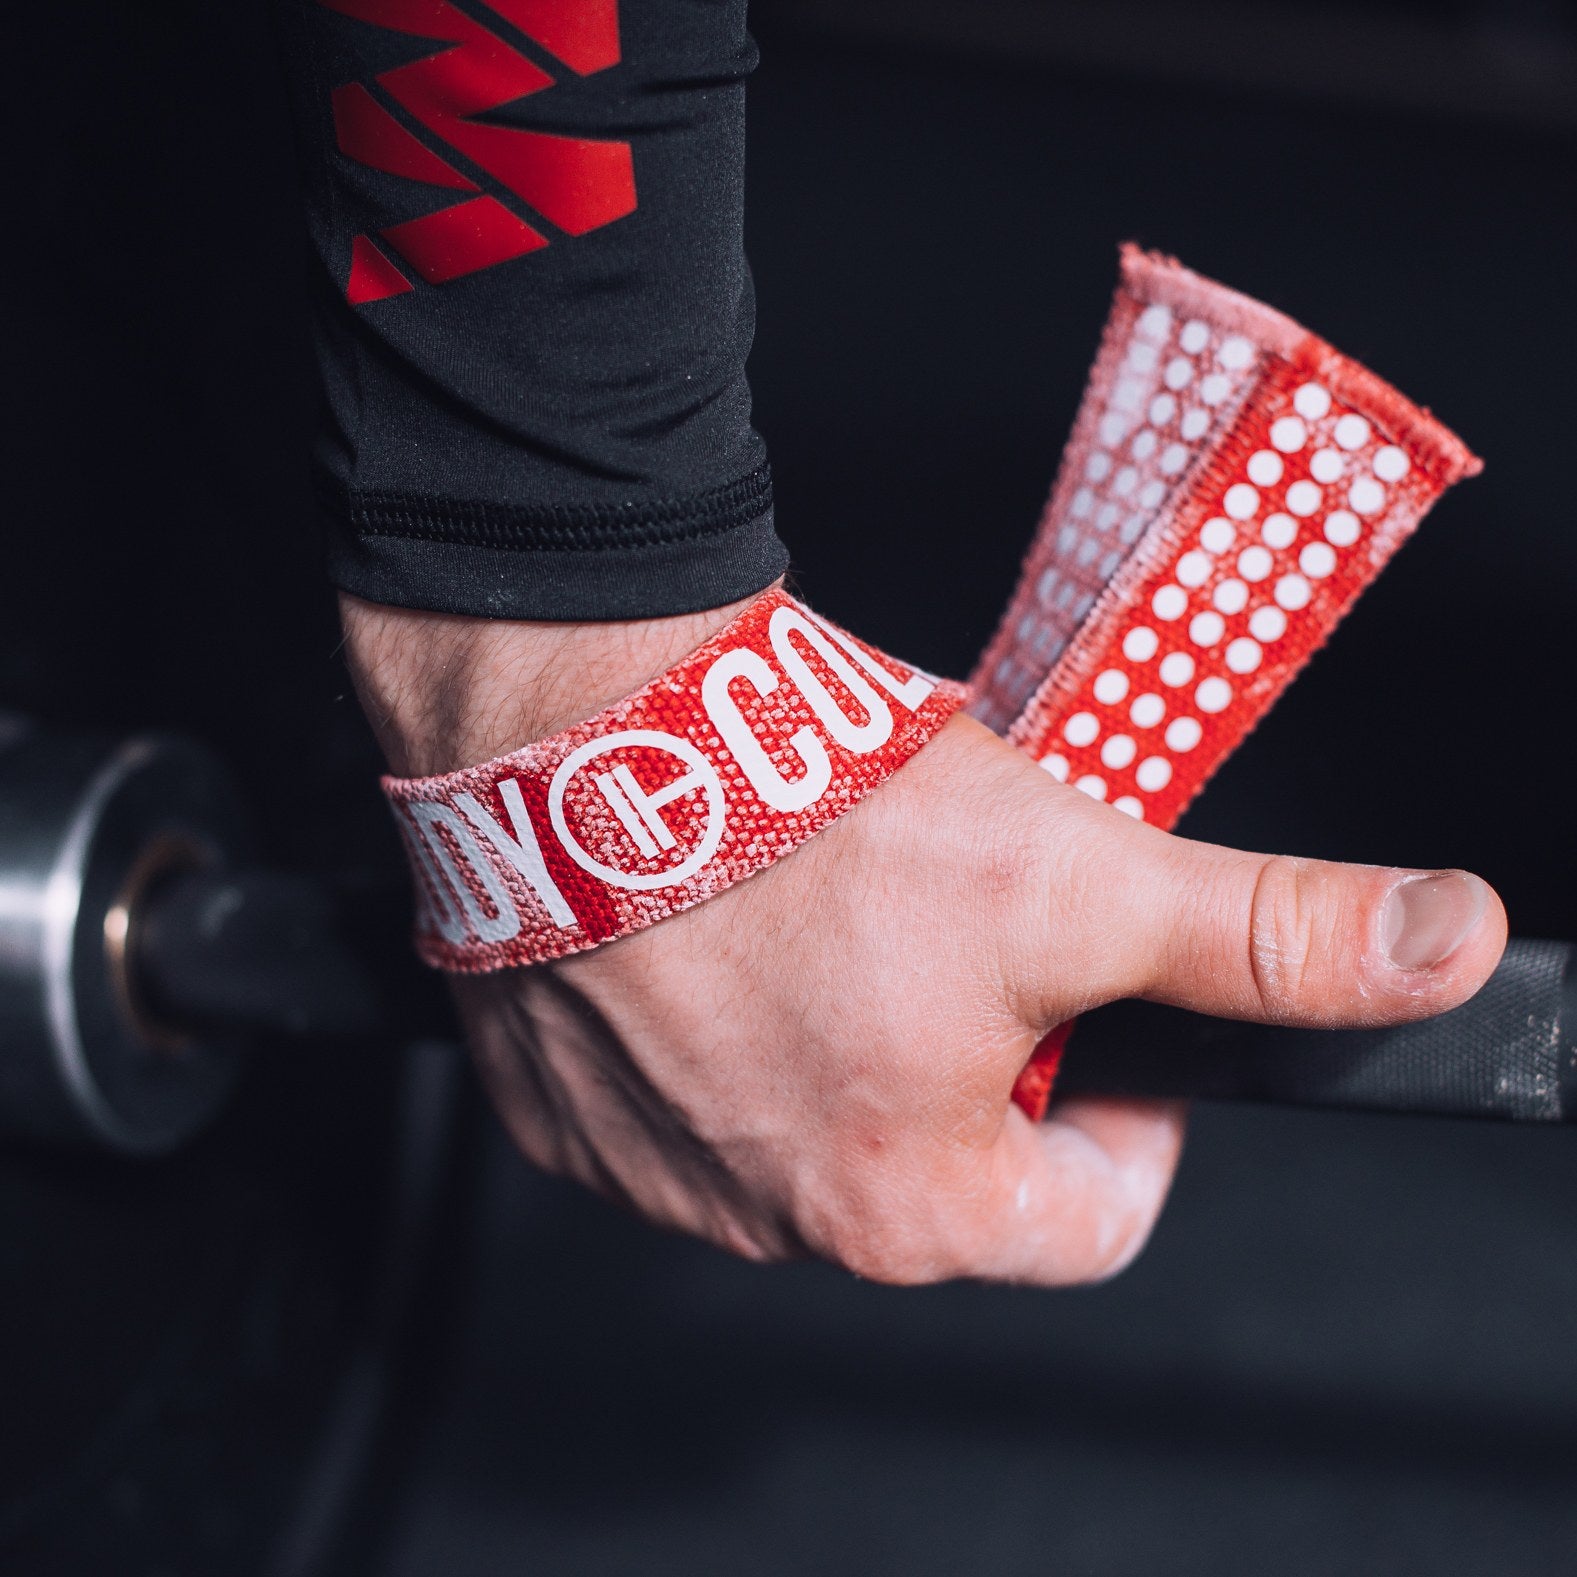 Flexi Muscles - Wrist Wraps For Weightlifting (Set of 2)., Shop Today. Get  it Tomorrow!